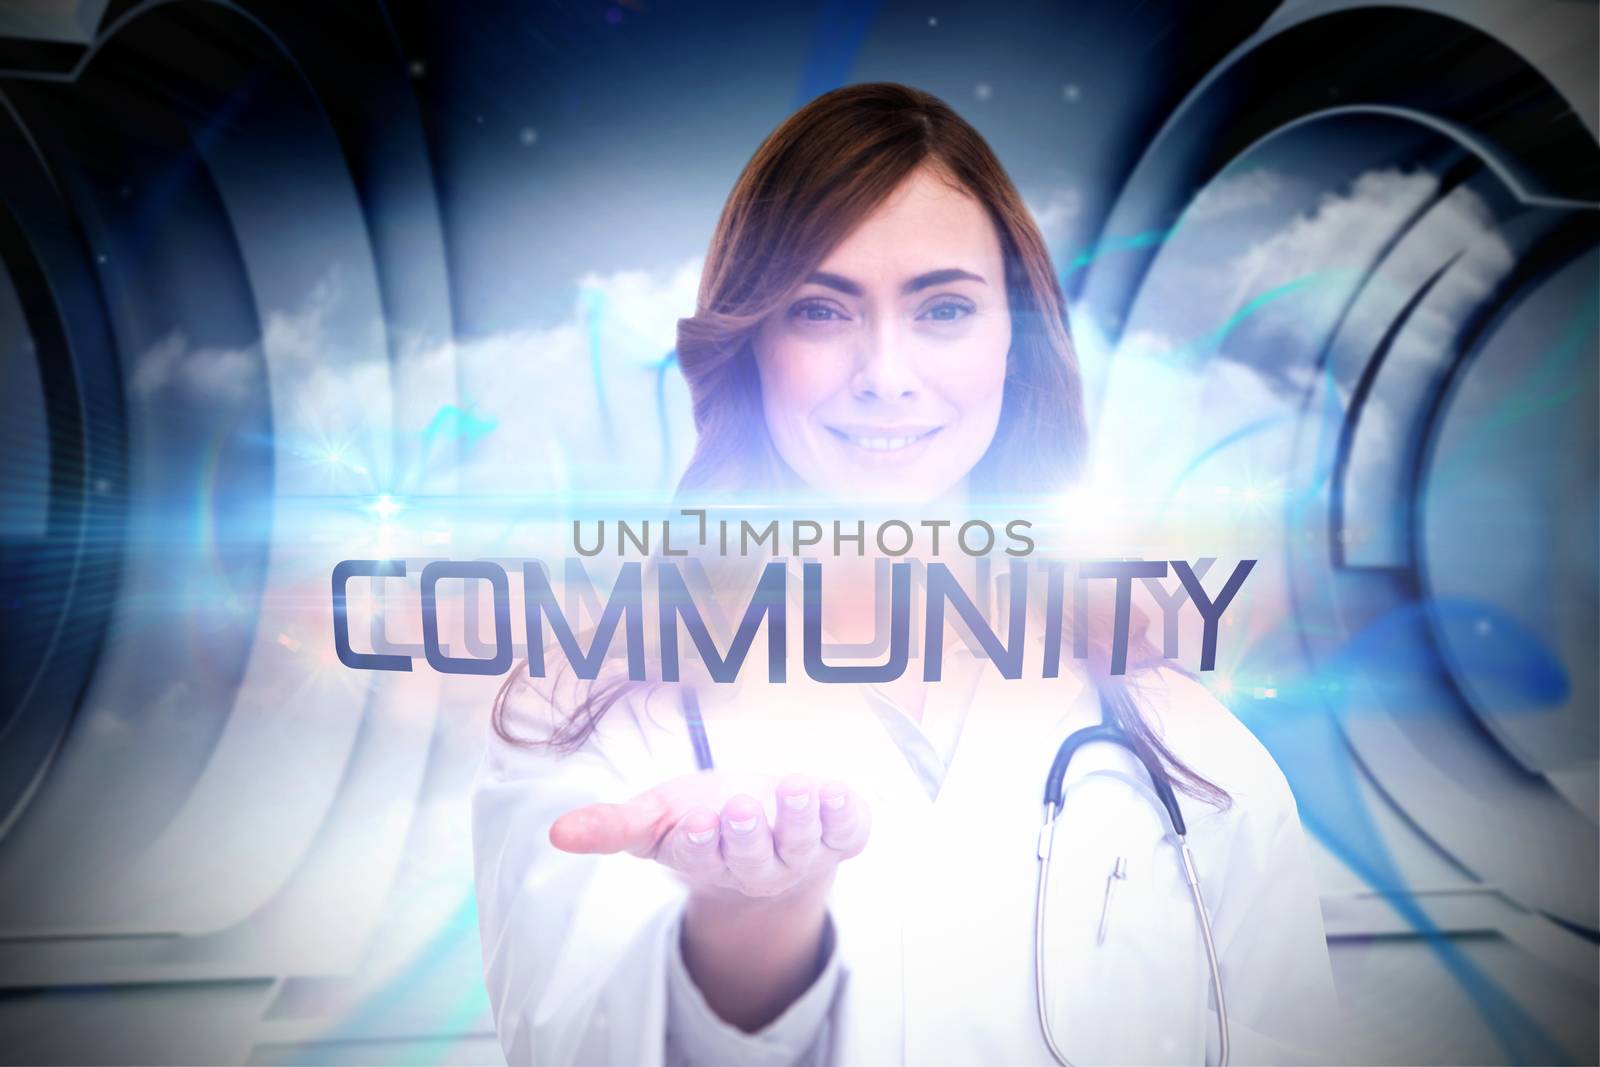 The word community and portrait of female nurse holding out open palm against abstract blue cloud design